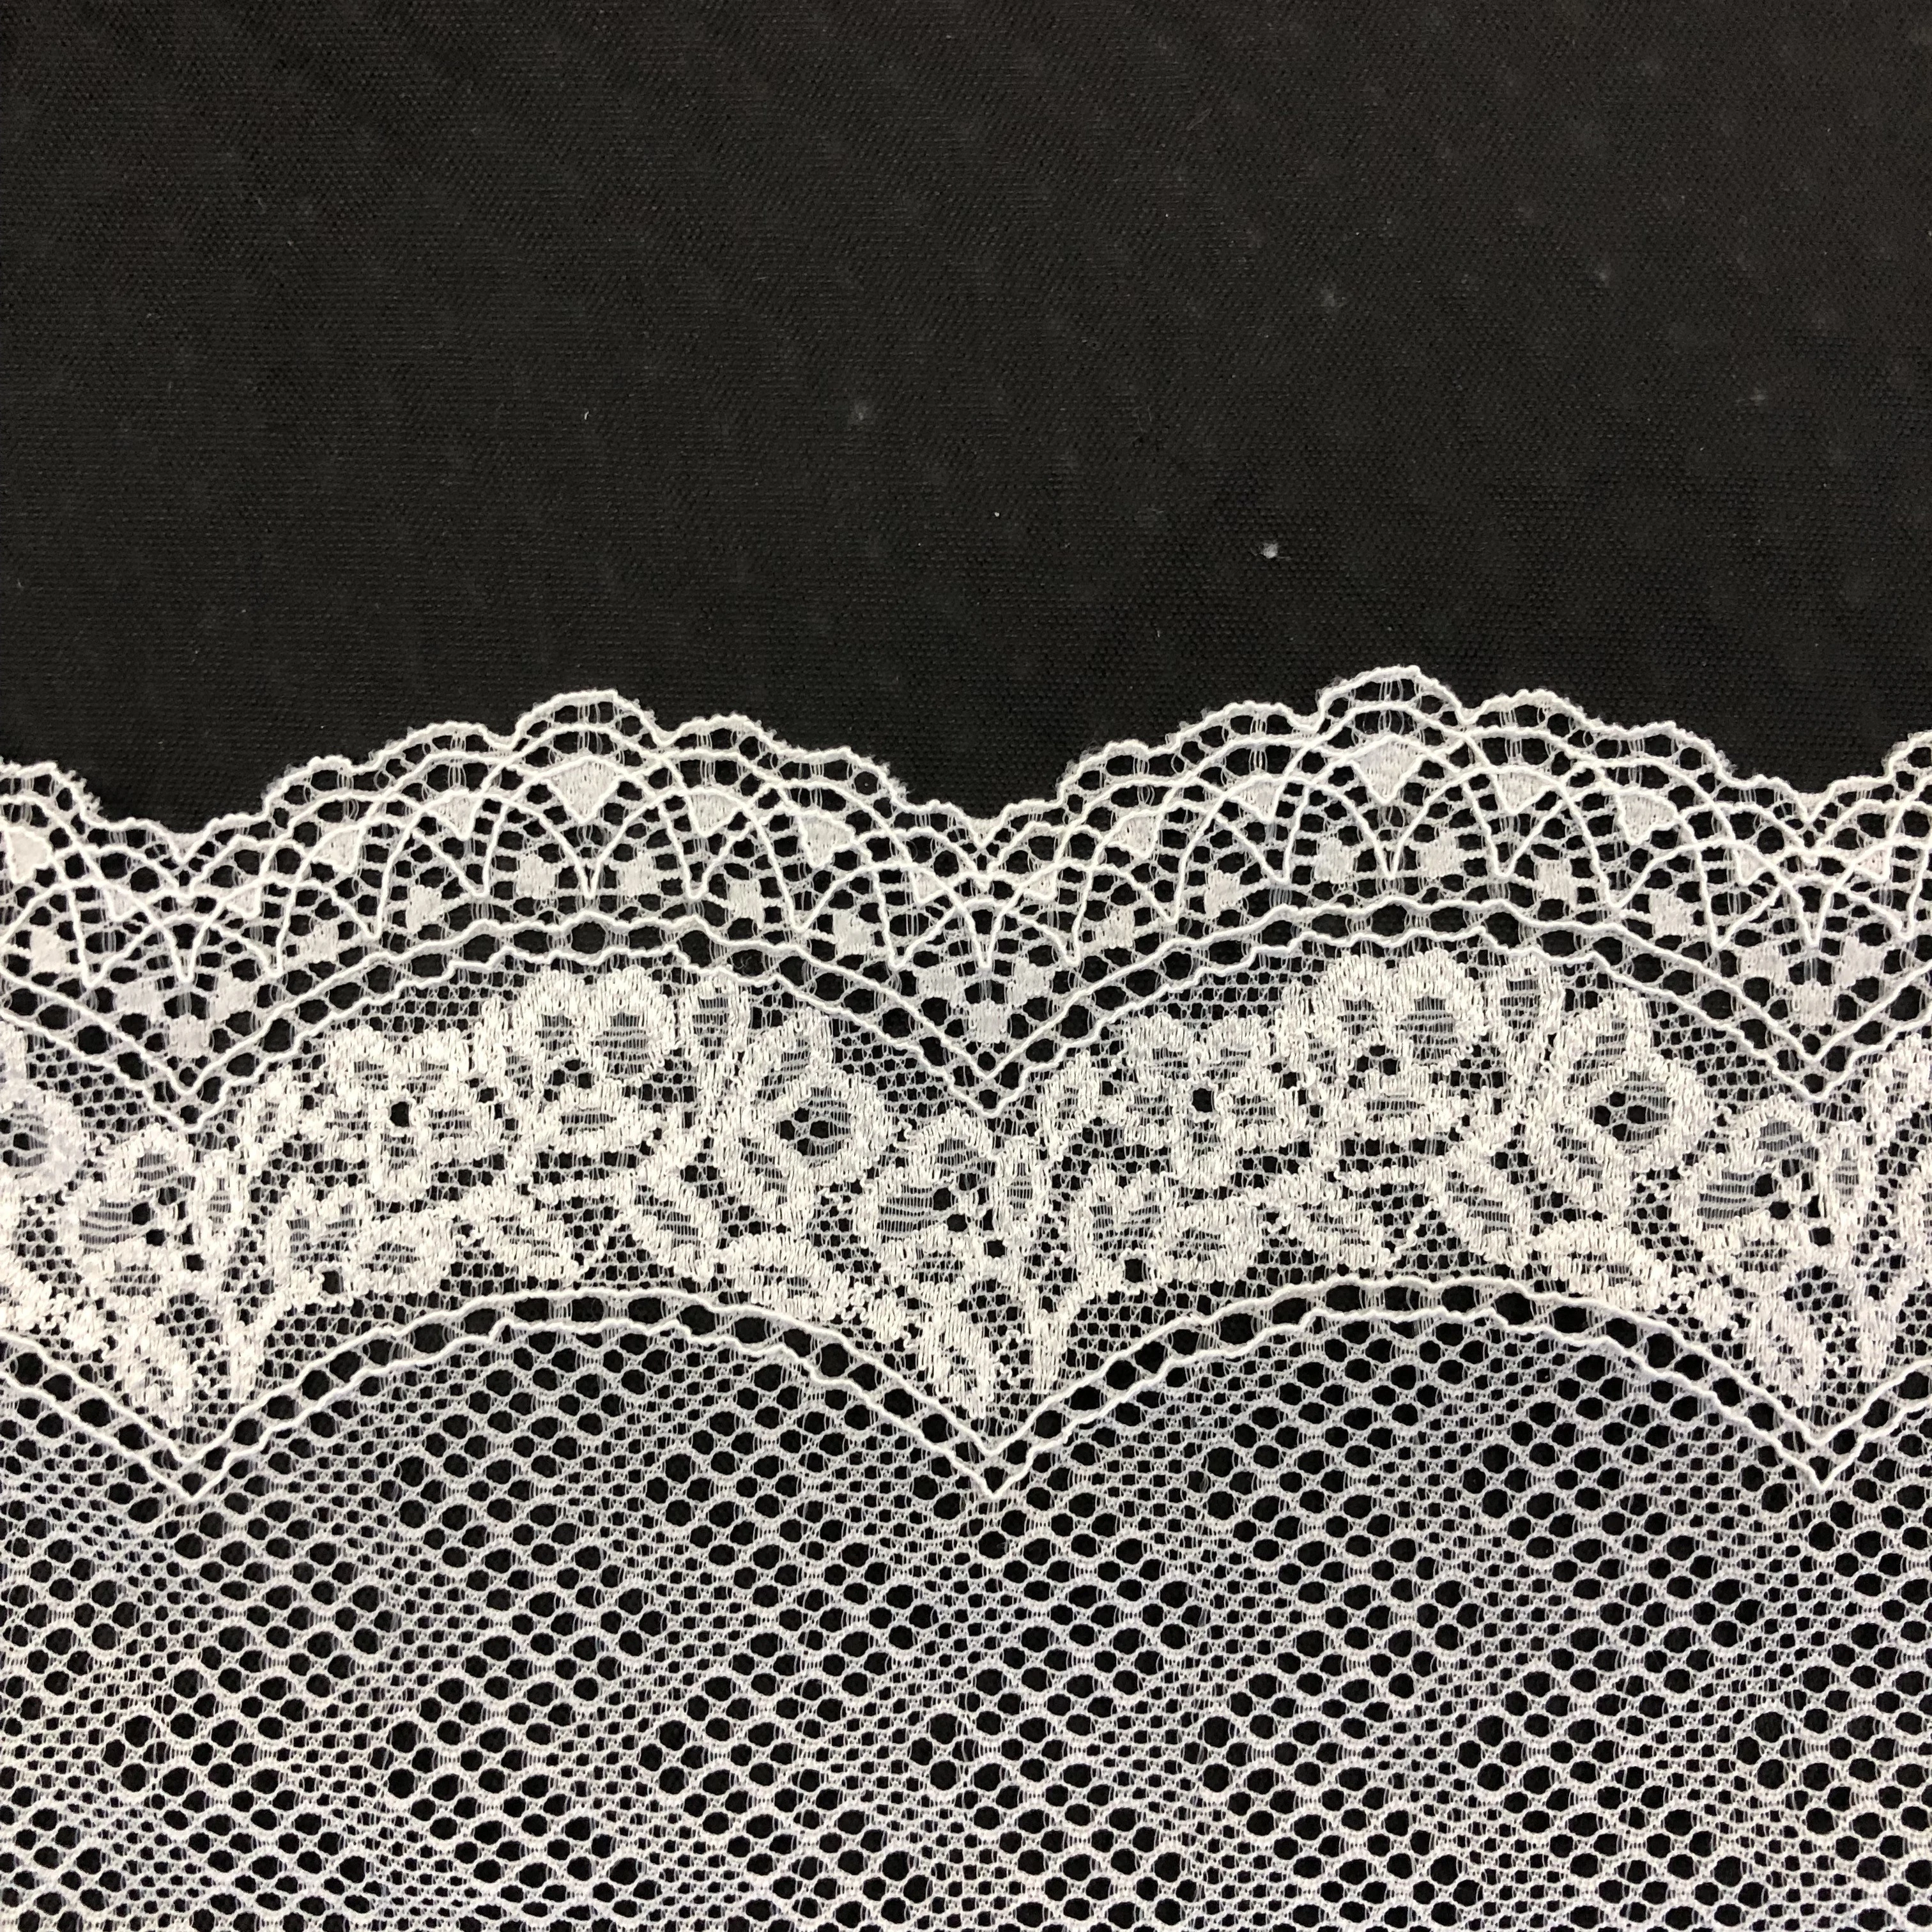 2020 18cm heavy rolling machine lace trimming for bra